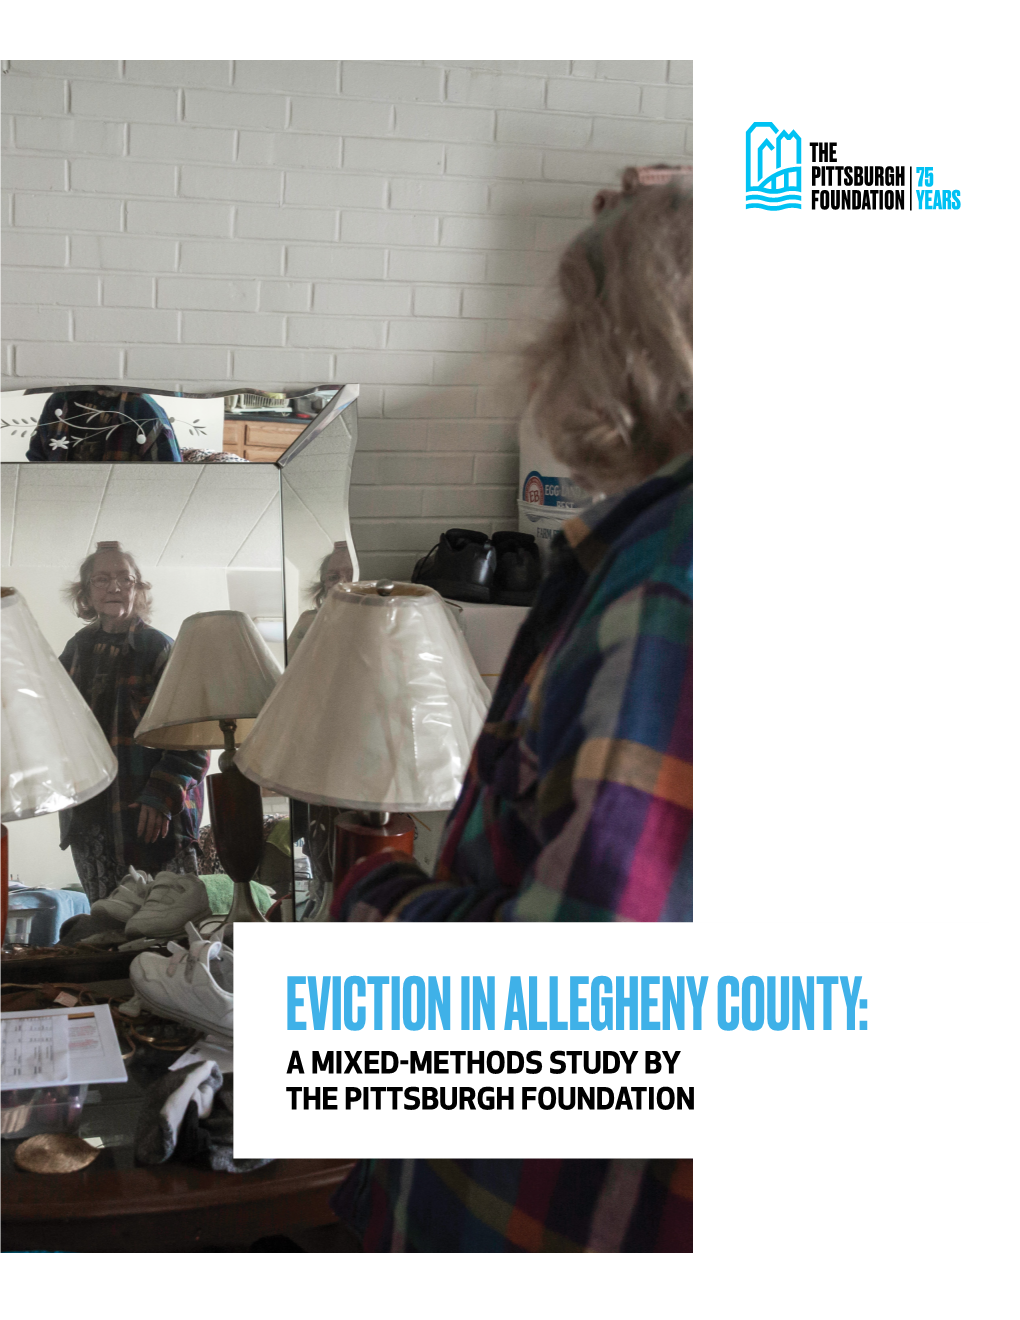 EVICTION in ALLEGHENY COUNTY: a MIXED-METHODS STUDY by the PITTSBURGH FOUNDATION 2 Eviction in Allegheny County: a Mixed-Methods Study by the Pittsburgh Foundation